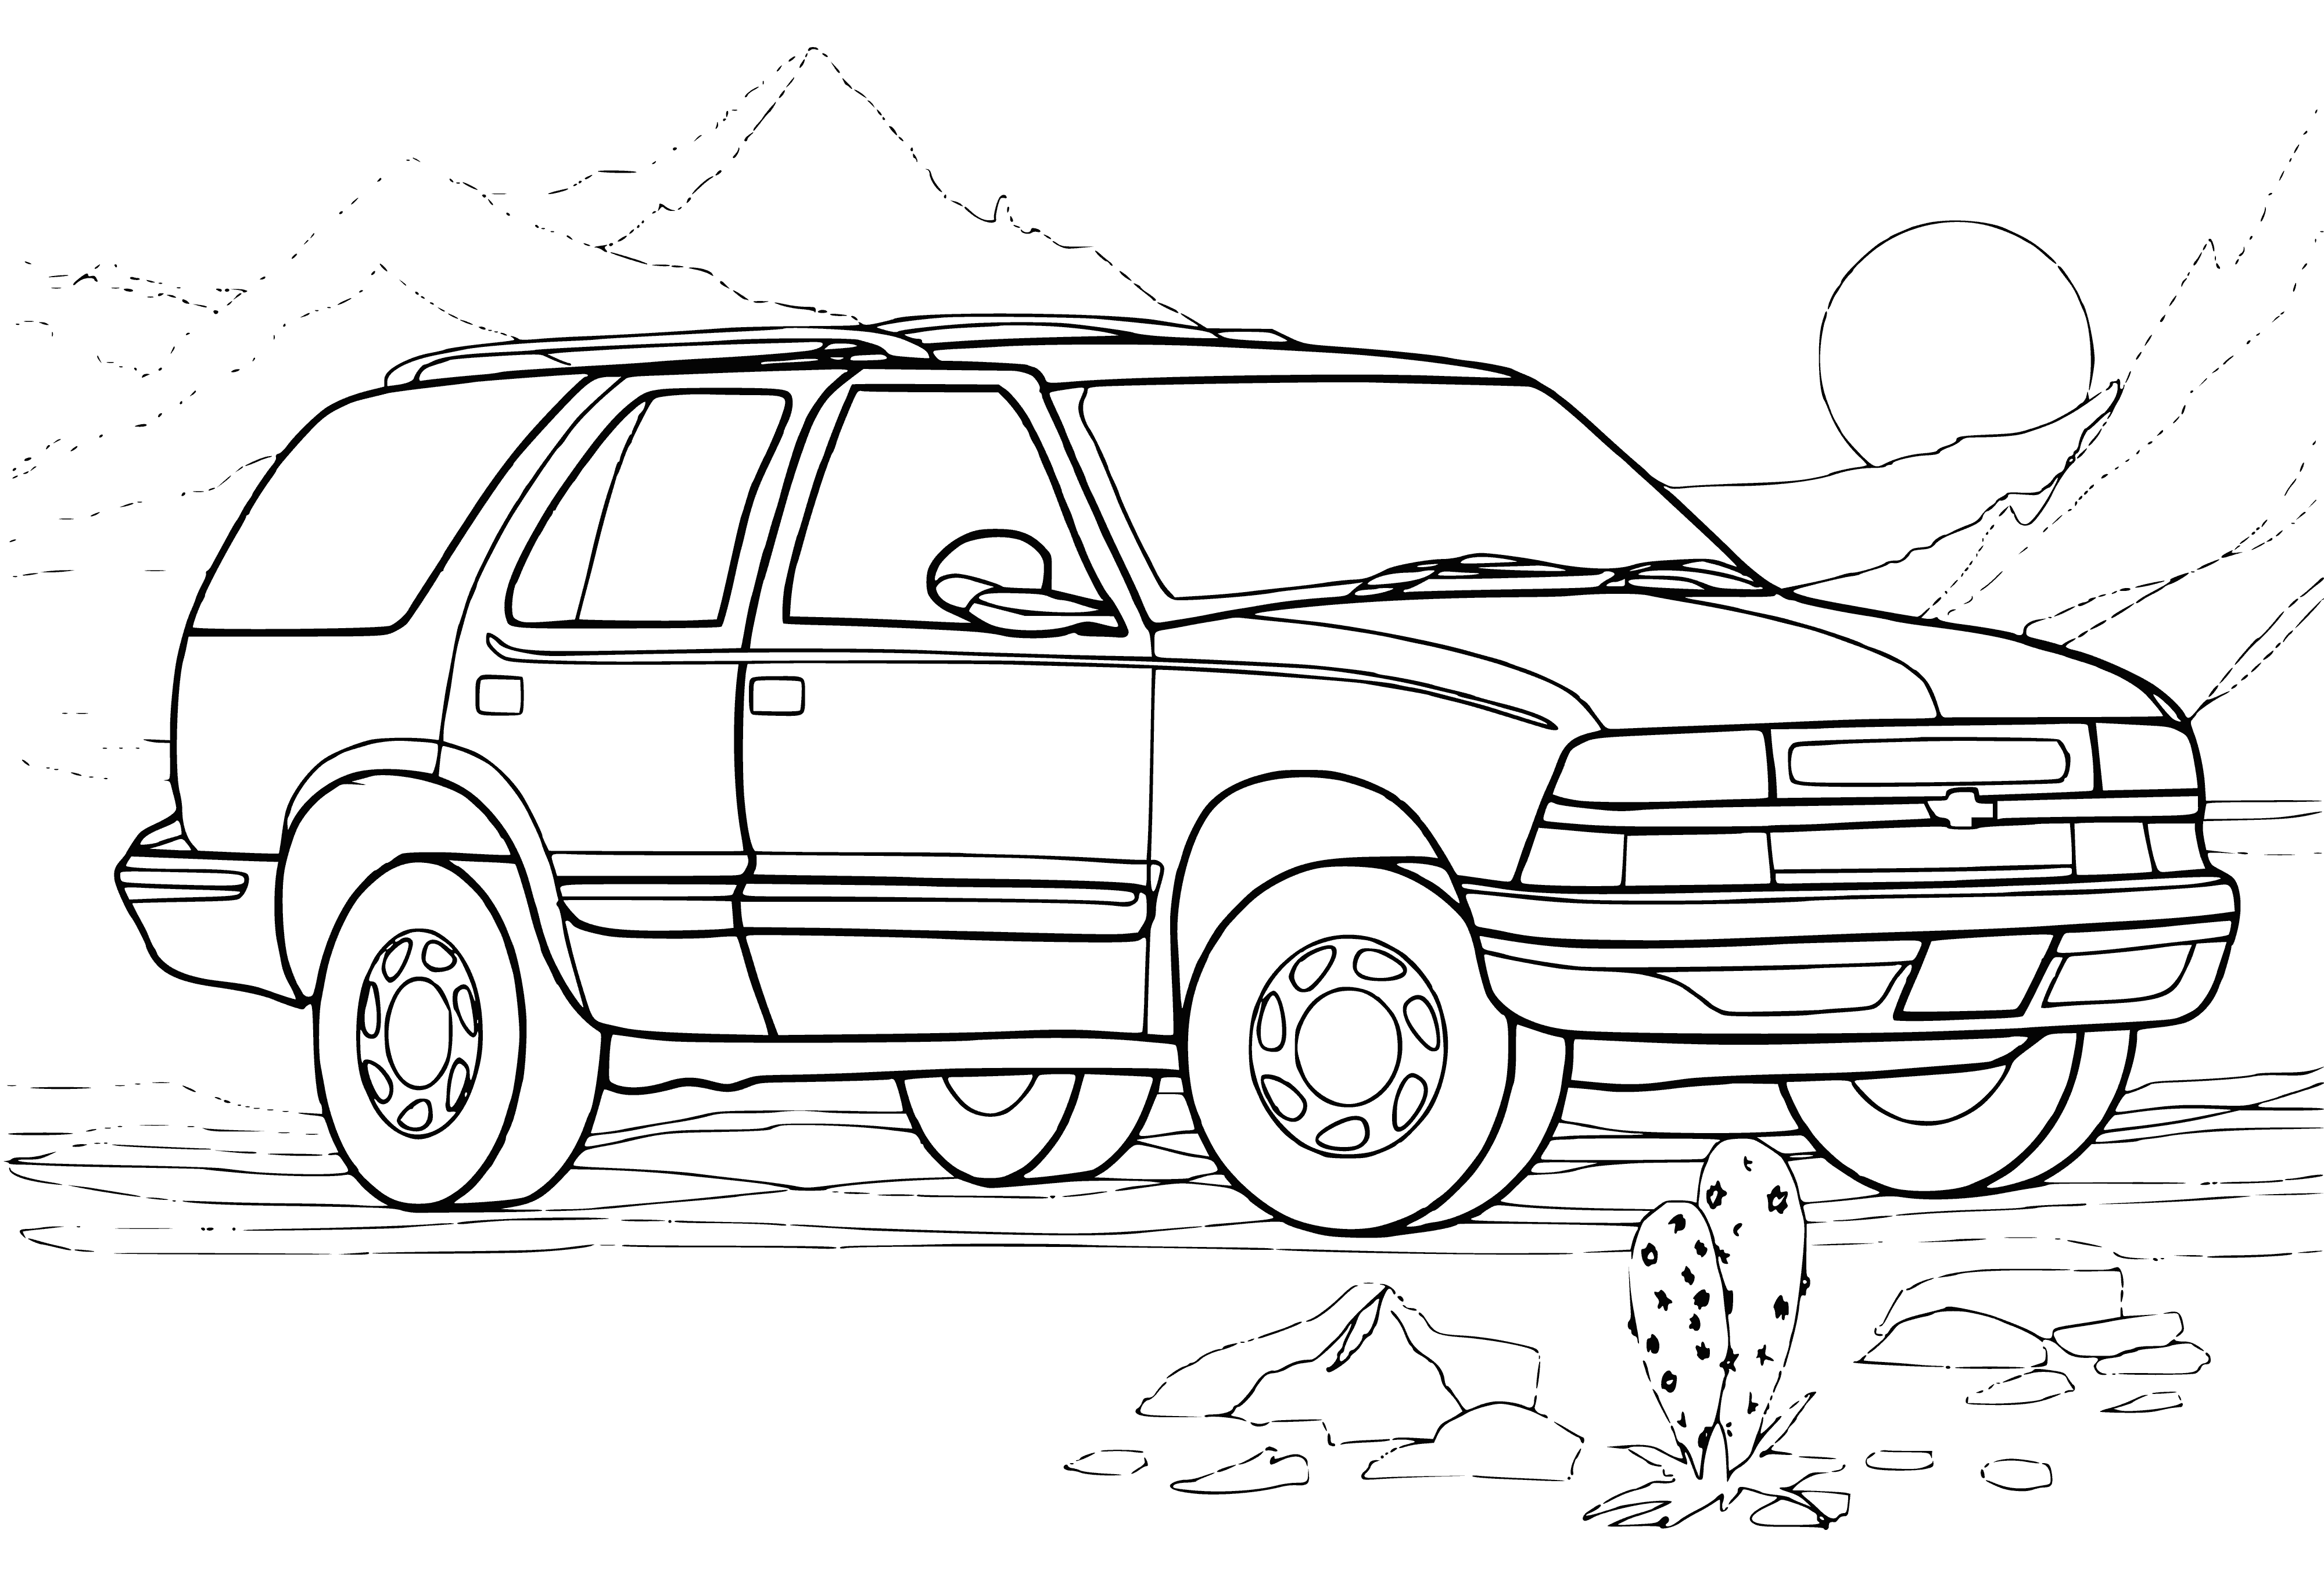 coloring page: Chevy Blazer: 4-door, sunroof, silver/black trim, tinted windows, black tires with chrome rims.